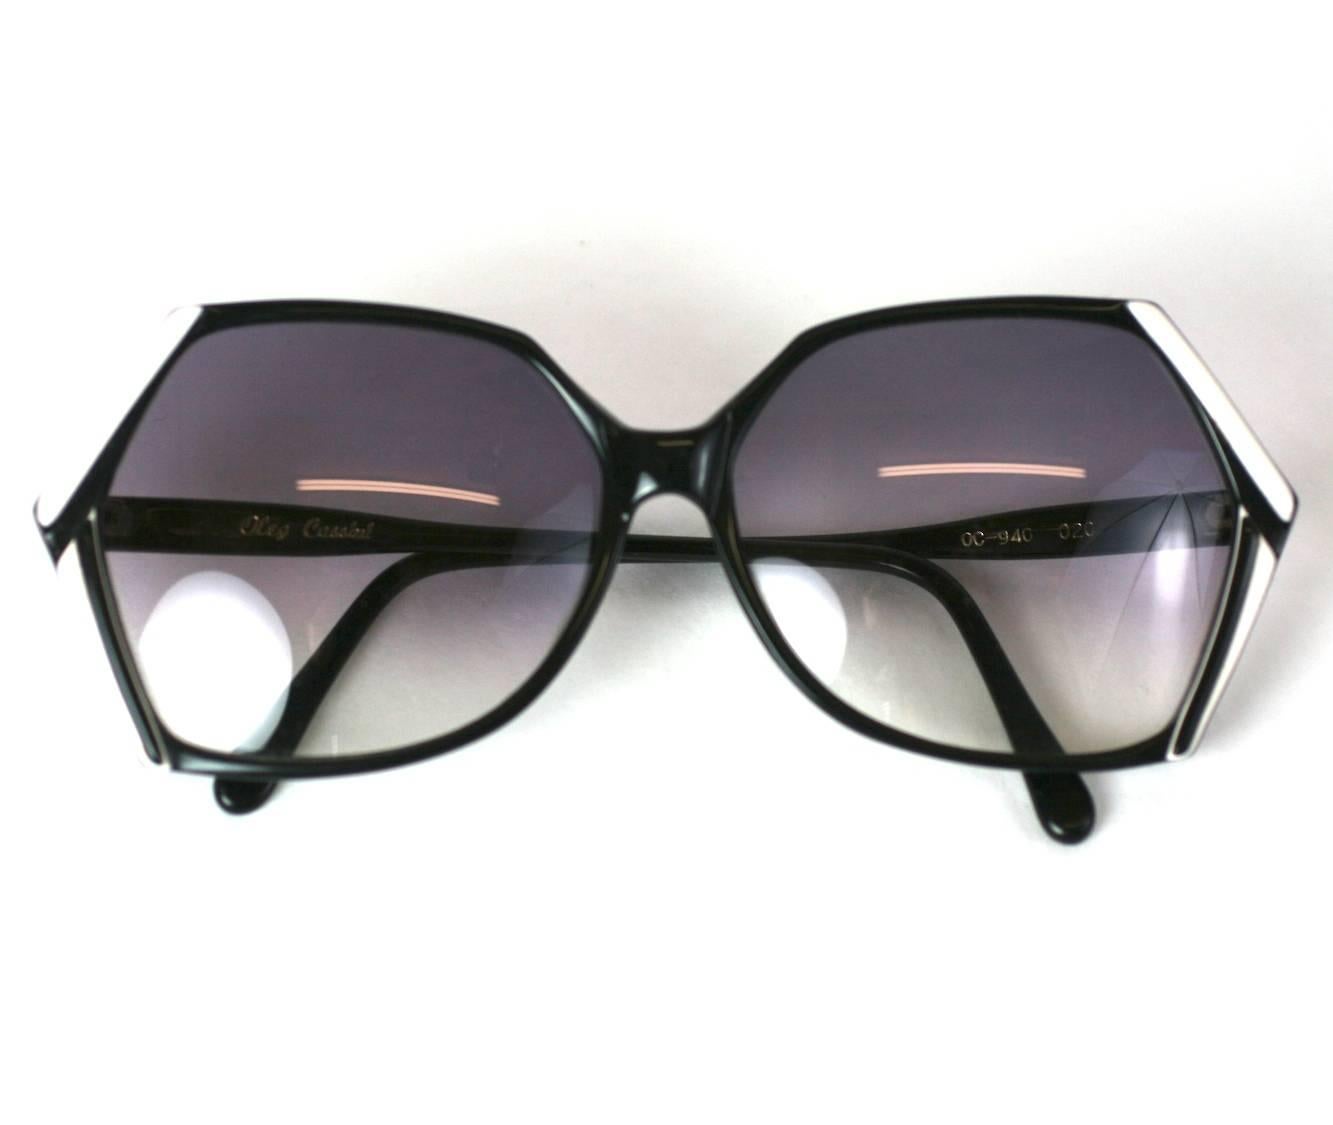 Oleg Cassini Graphic Black White Sunglasses In Excellent Condition For Sale In New York, NY